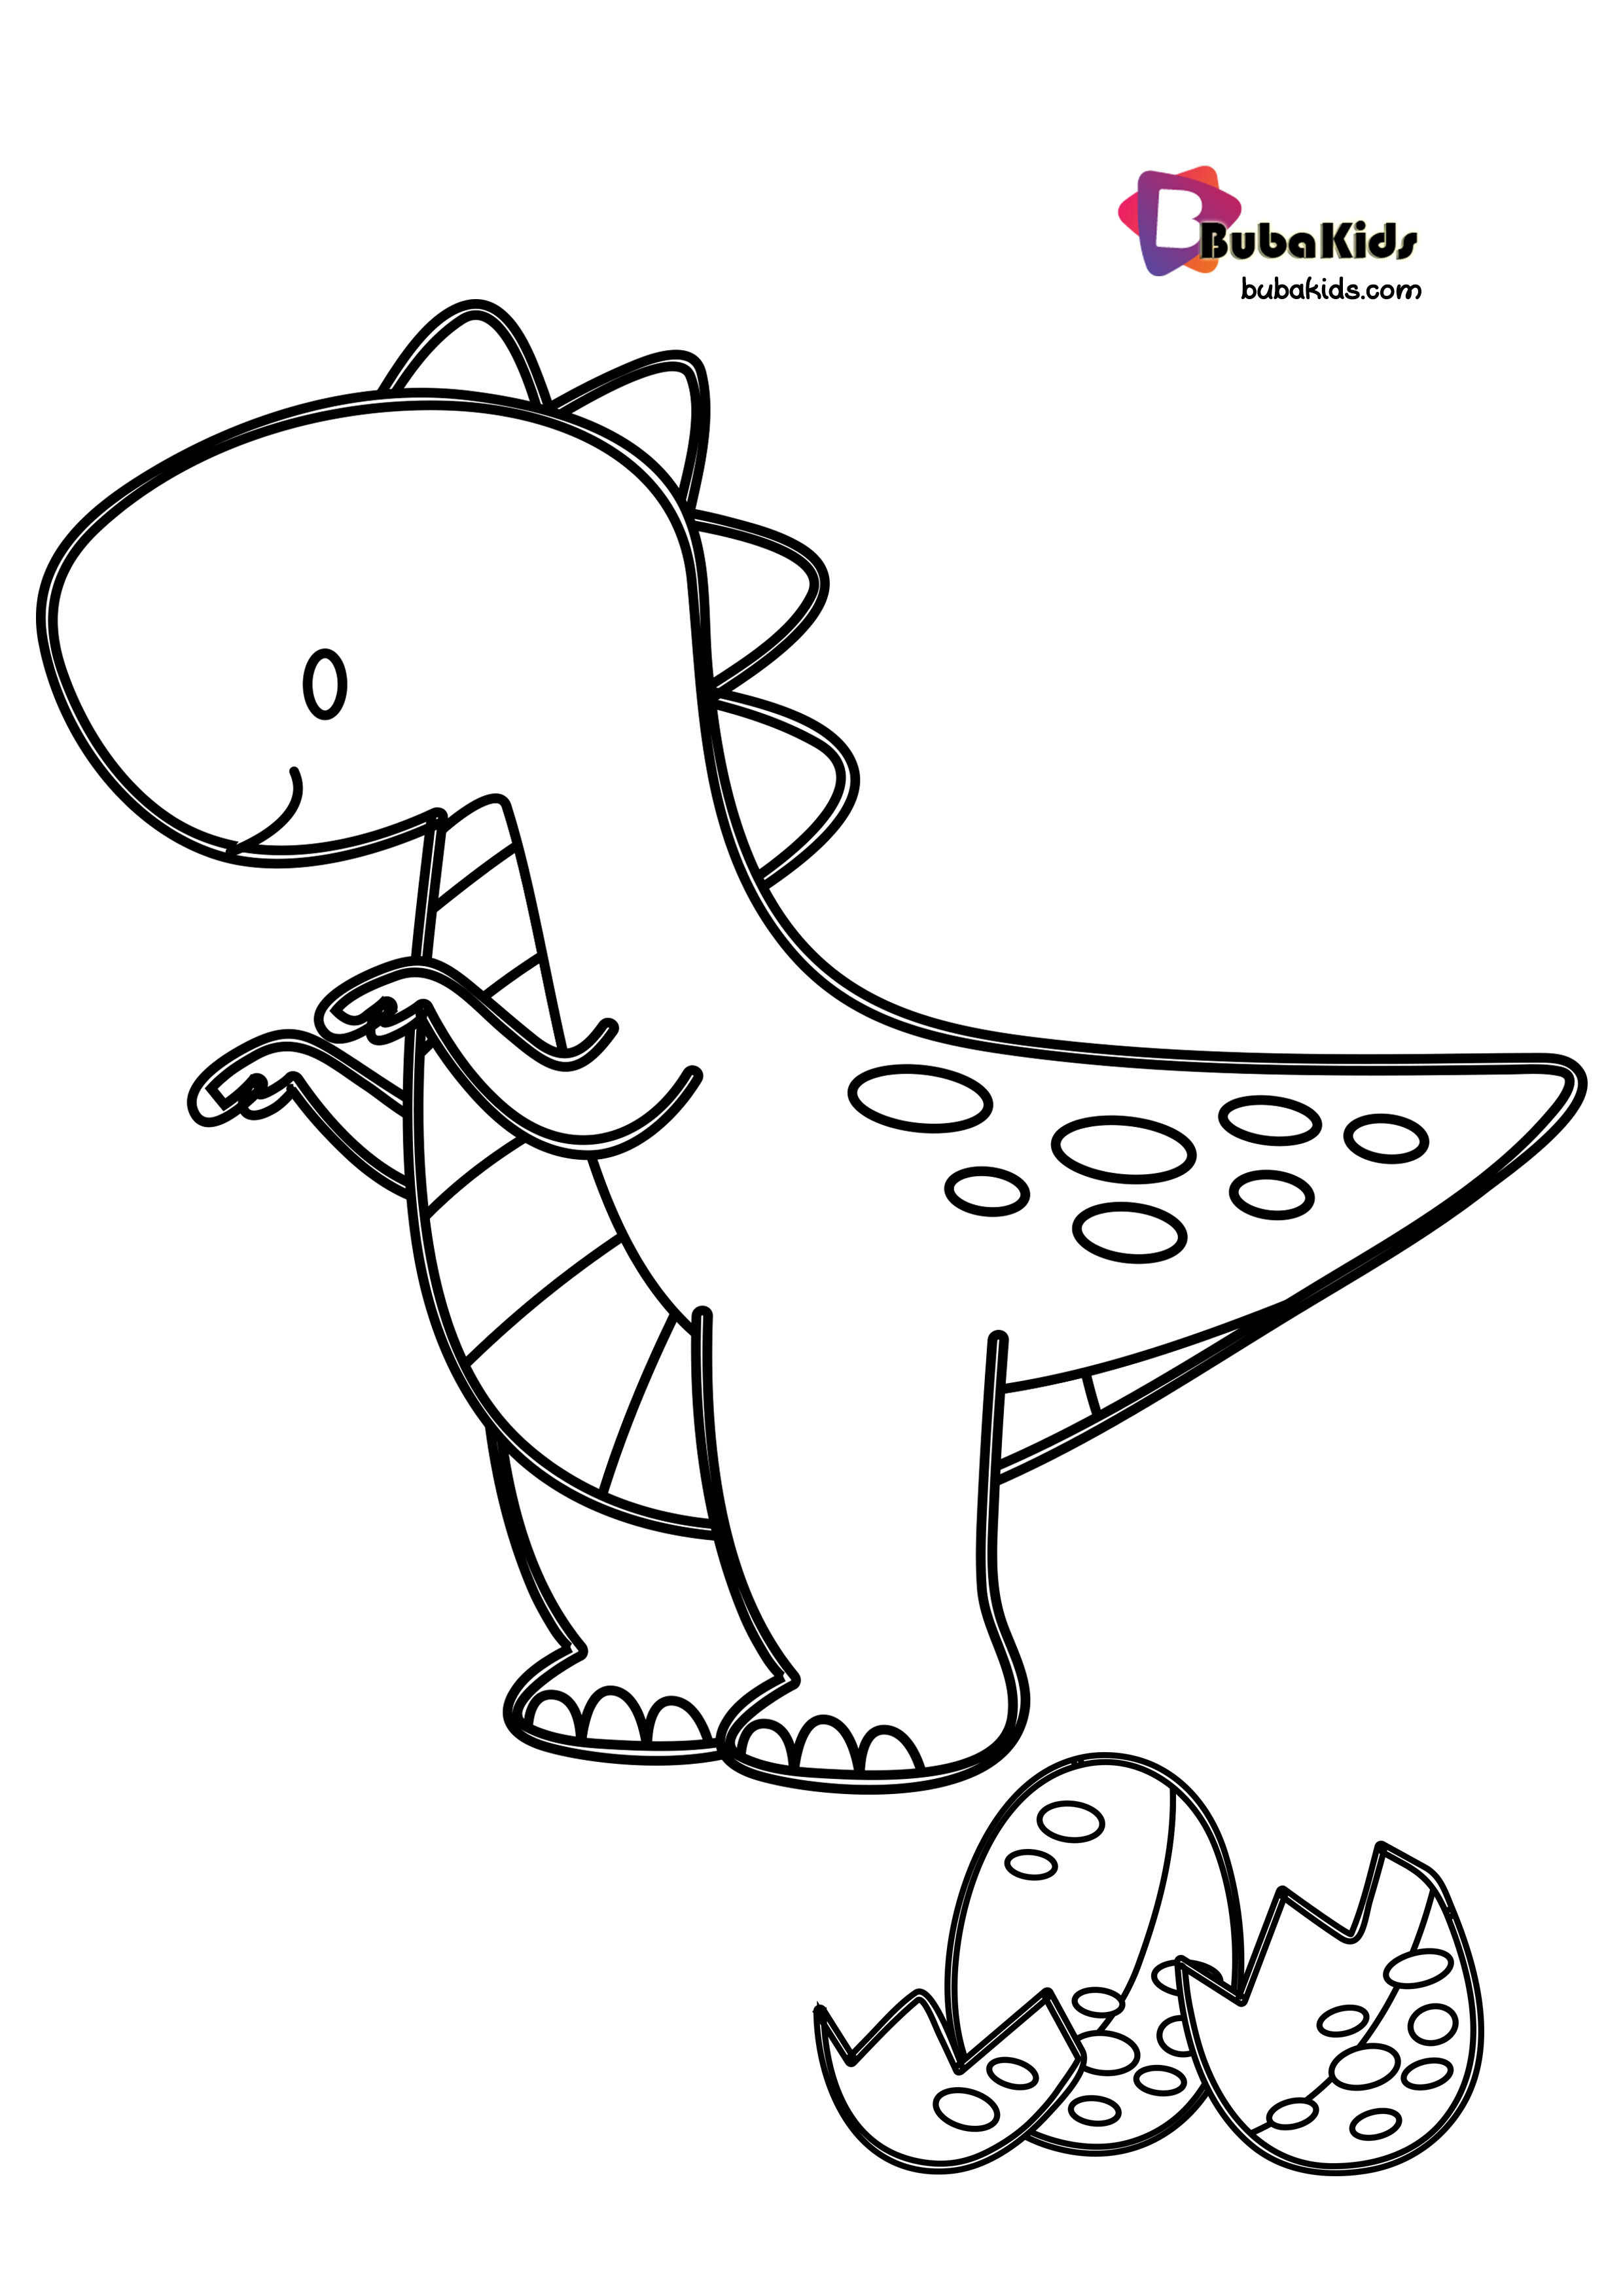 Baby TRex Coloring Page With Egg   BubaKids.com